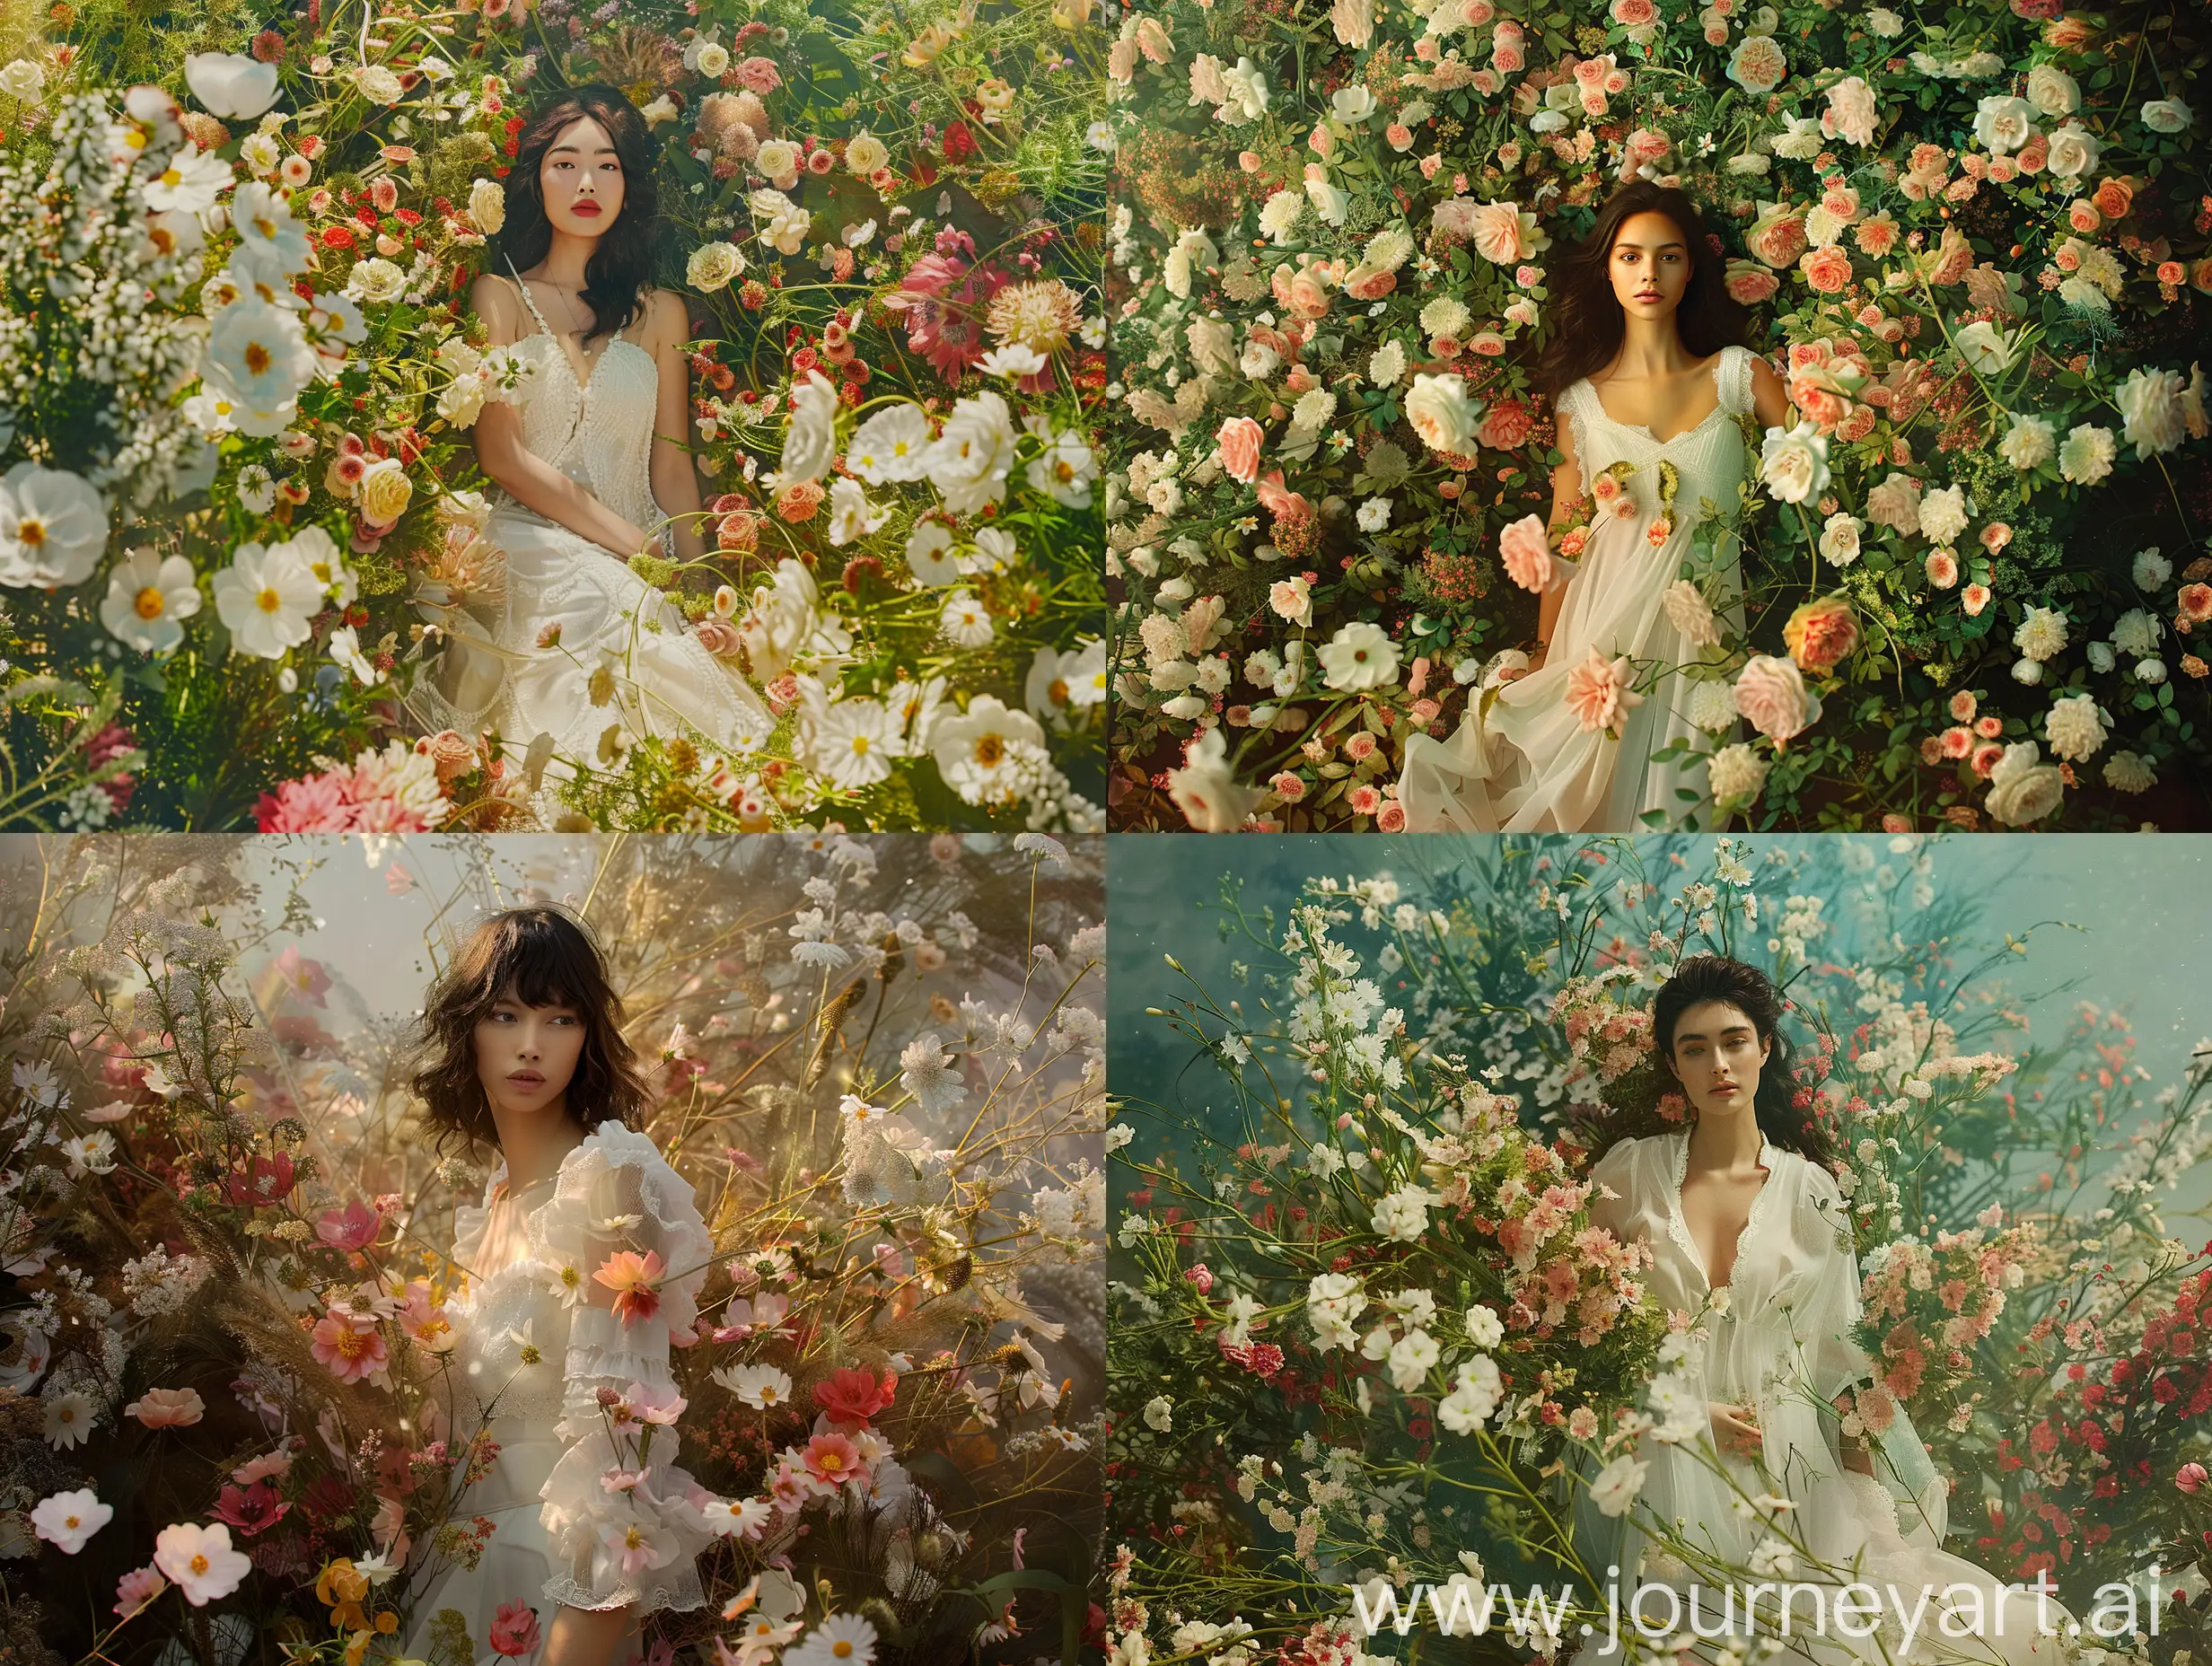 Natural photo , 8k , realistic , this captivating image, we are presented with a serene scene that encapsulates the essence of natural beauty and elegance. At the heart of the composition is a woman, who stands enveloped in an array of flowers, adding a sense of vitality and freshness to the scene. She is dressed in a pristine white dress that exudes a sense of purity and grace, perfectly complementing the natural surroundings. The outdoor setting feeling of freedom and harmony with nature. The woman's presence is strong yet graceful, as she becomes one with the floral backdrop that surrounds her. Her attire and the way she blends into the environment suggest a celebration of natural beauty and femininity. It's as if she is part of a larger narrative that speaks to the connection between humans and the natural world.